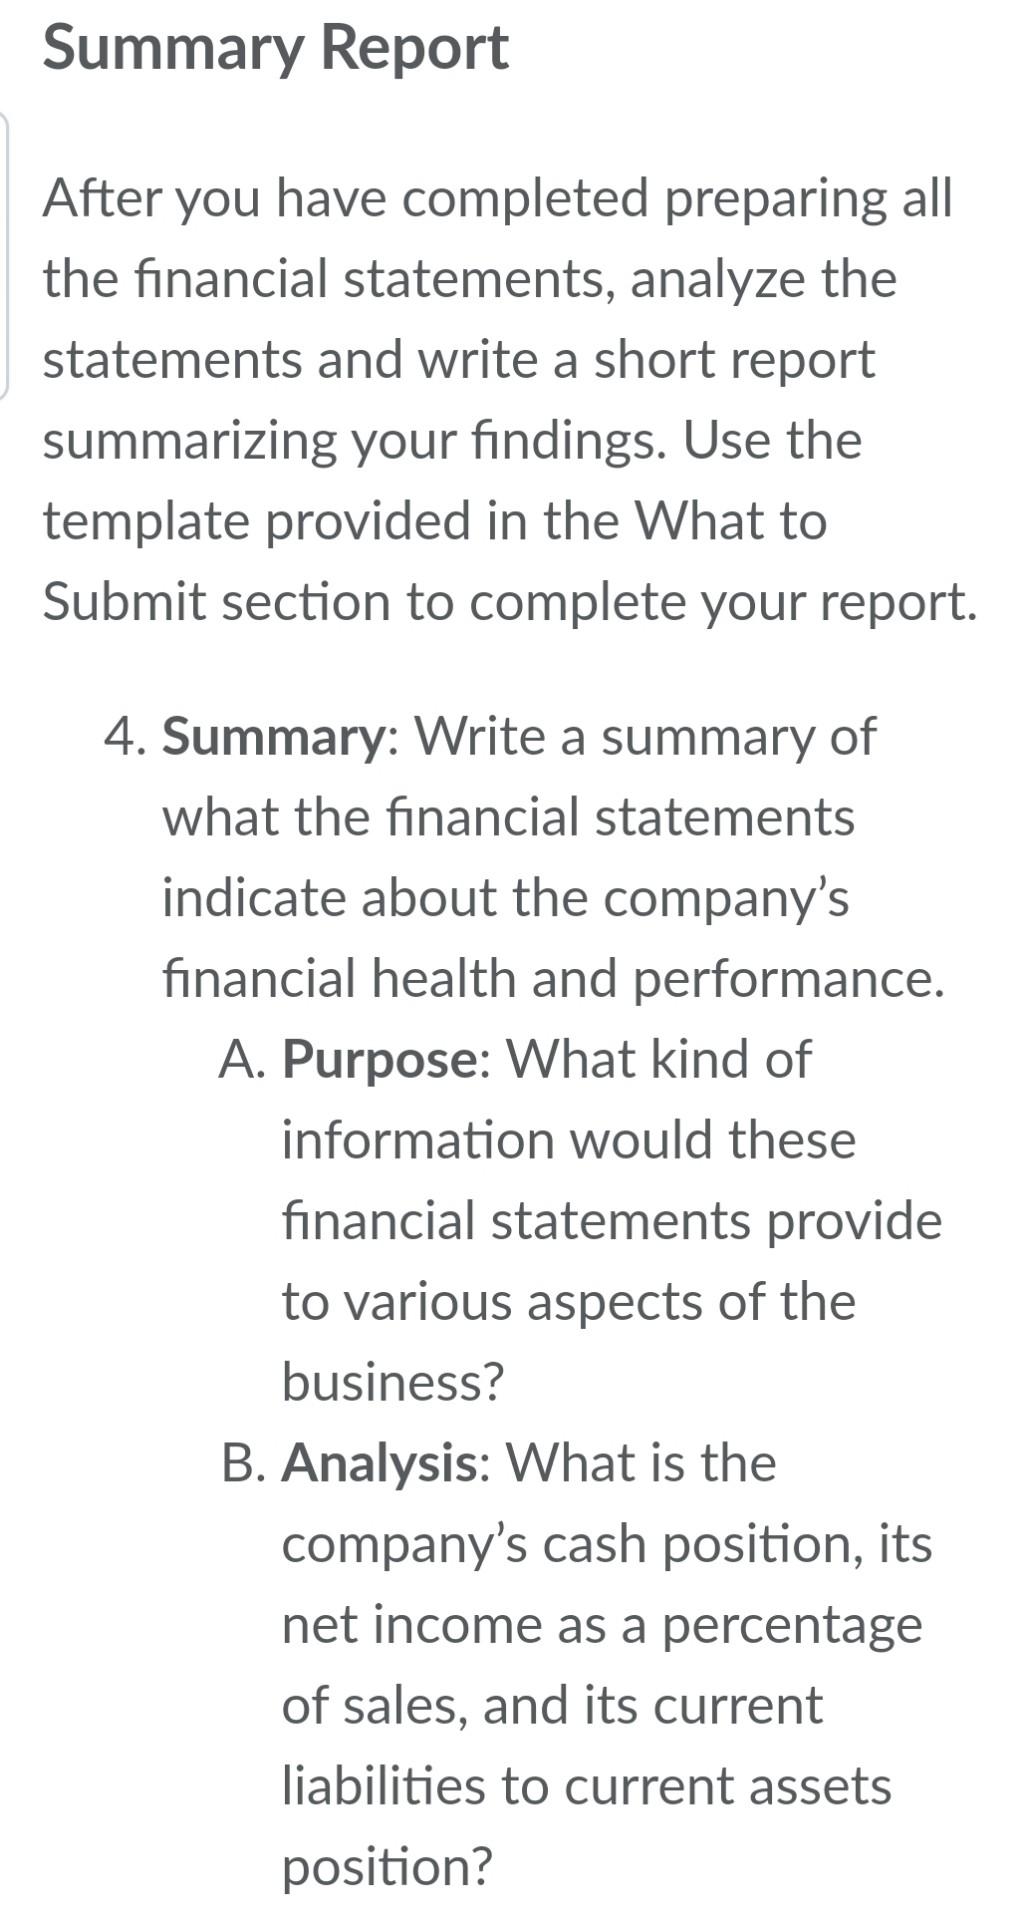 Annual Financial Report Examples - 12+ PDF   Examples